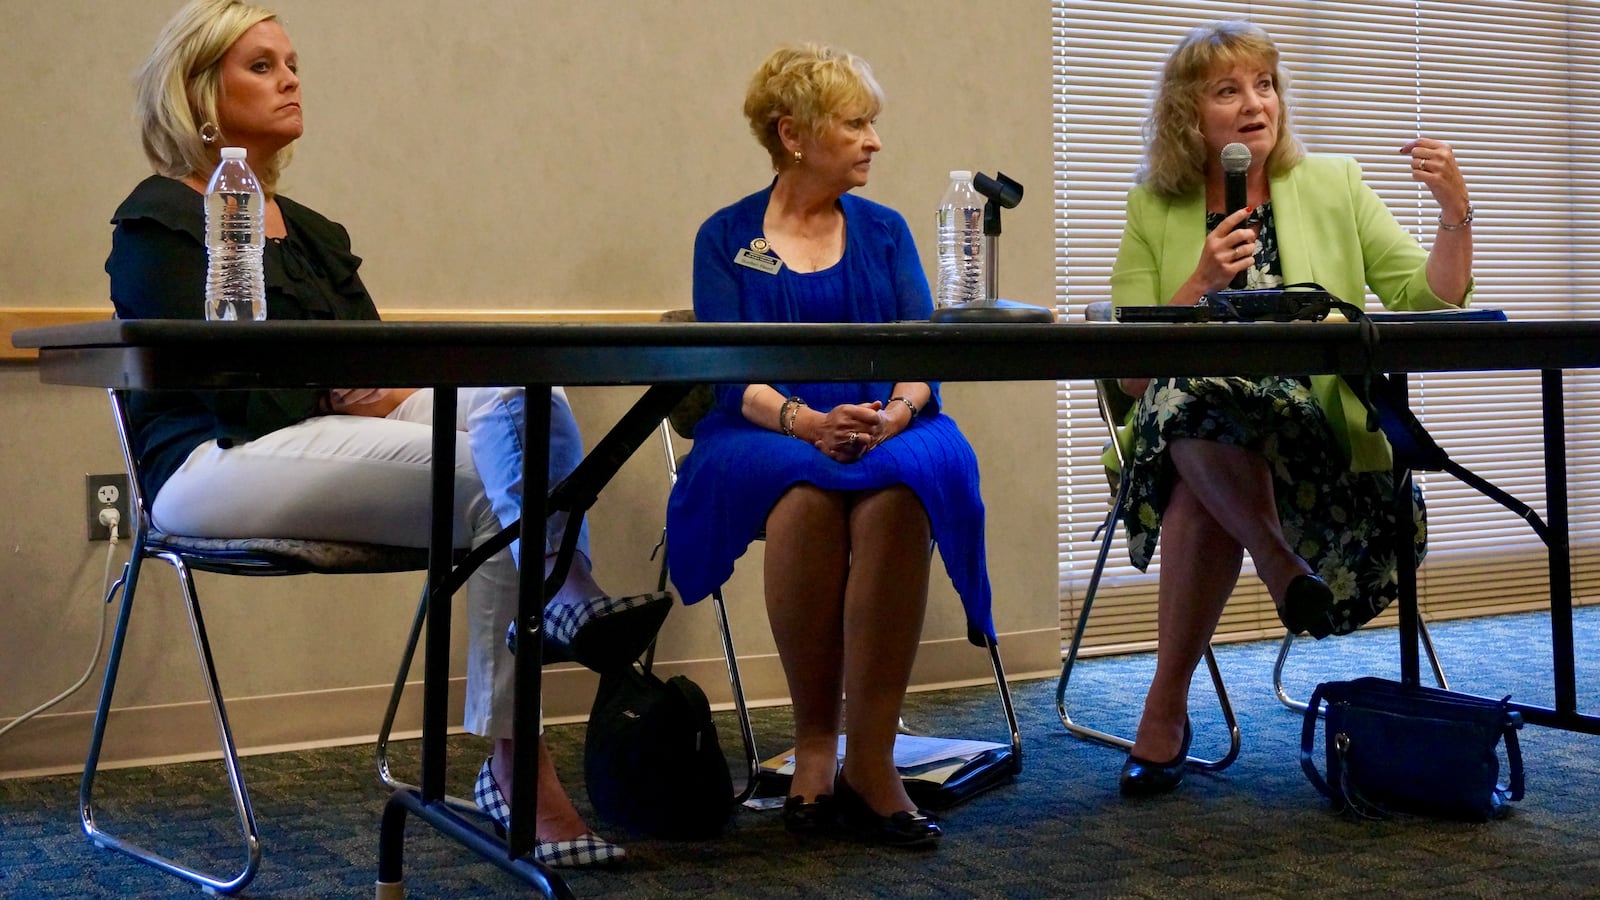 Three state superintendents were on the panel. From left to right: Jennifer McCormick, Suellen Reed and Glenda Ritz.